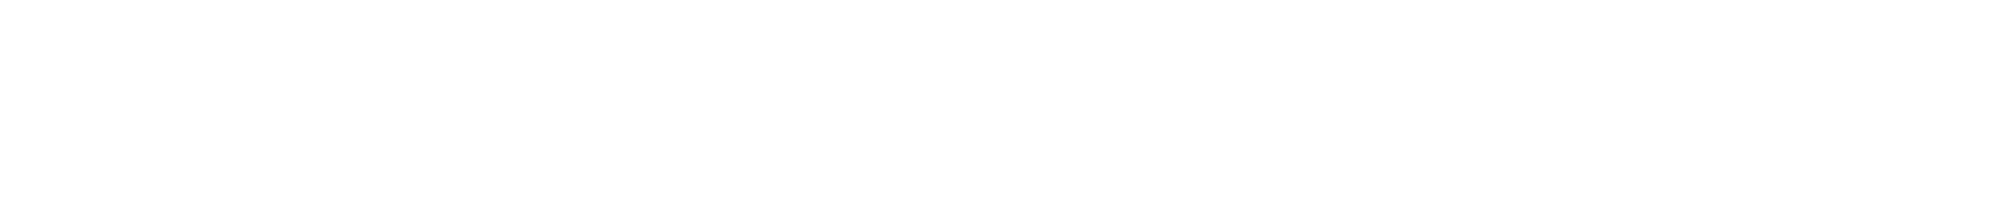 A green background with the word vacc written in white.